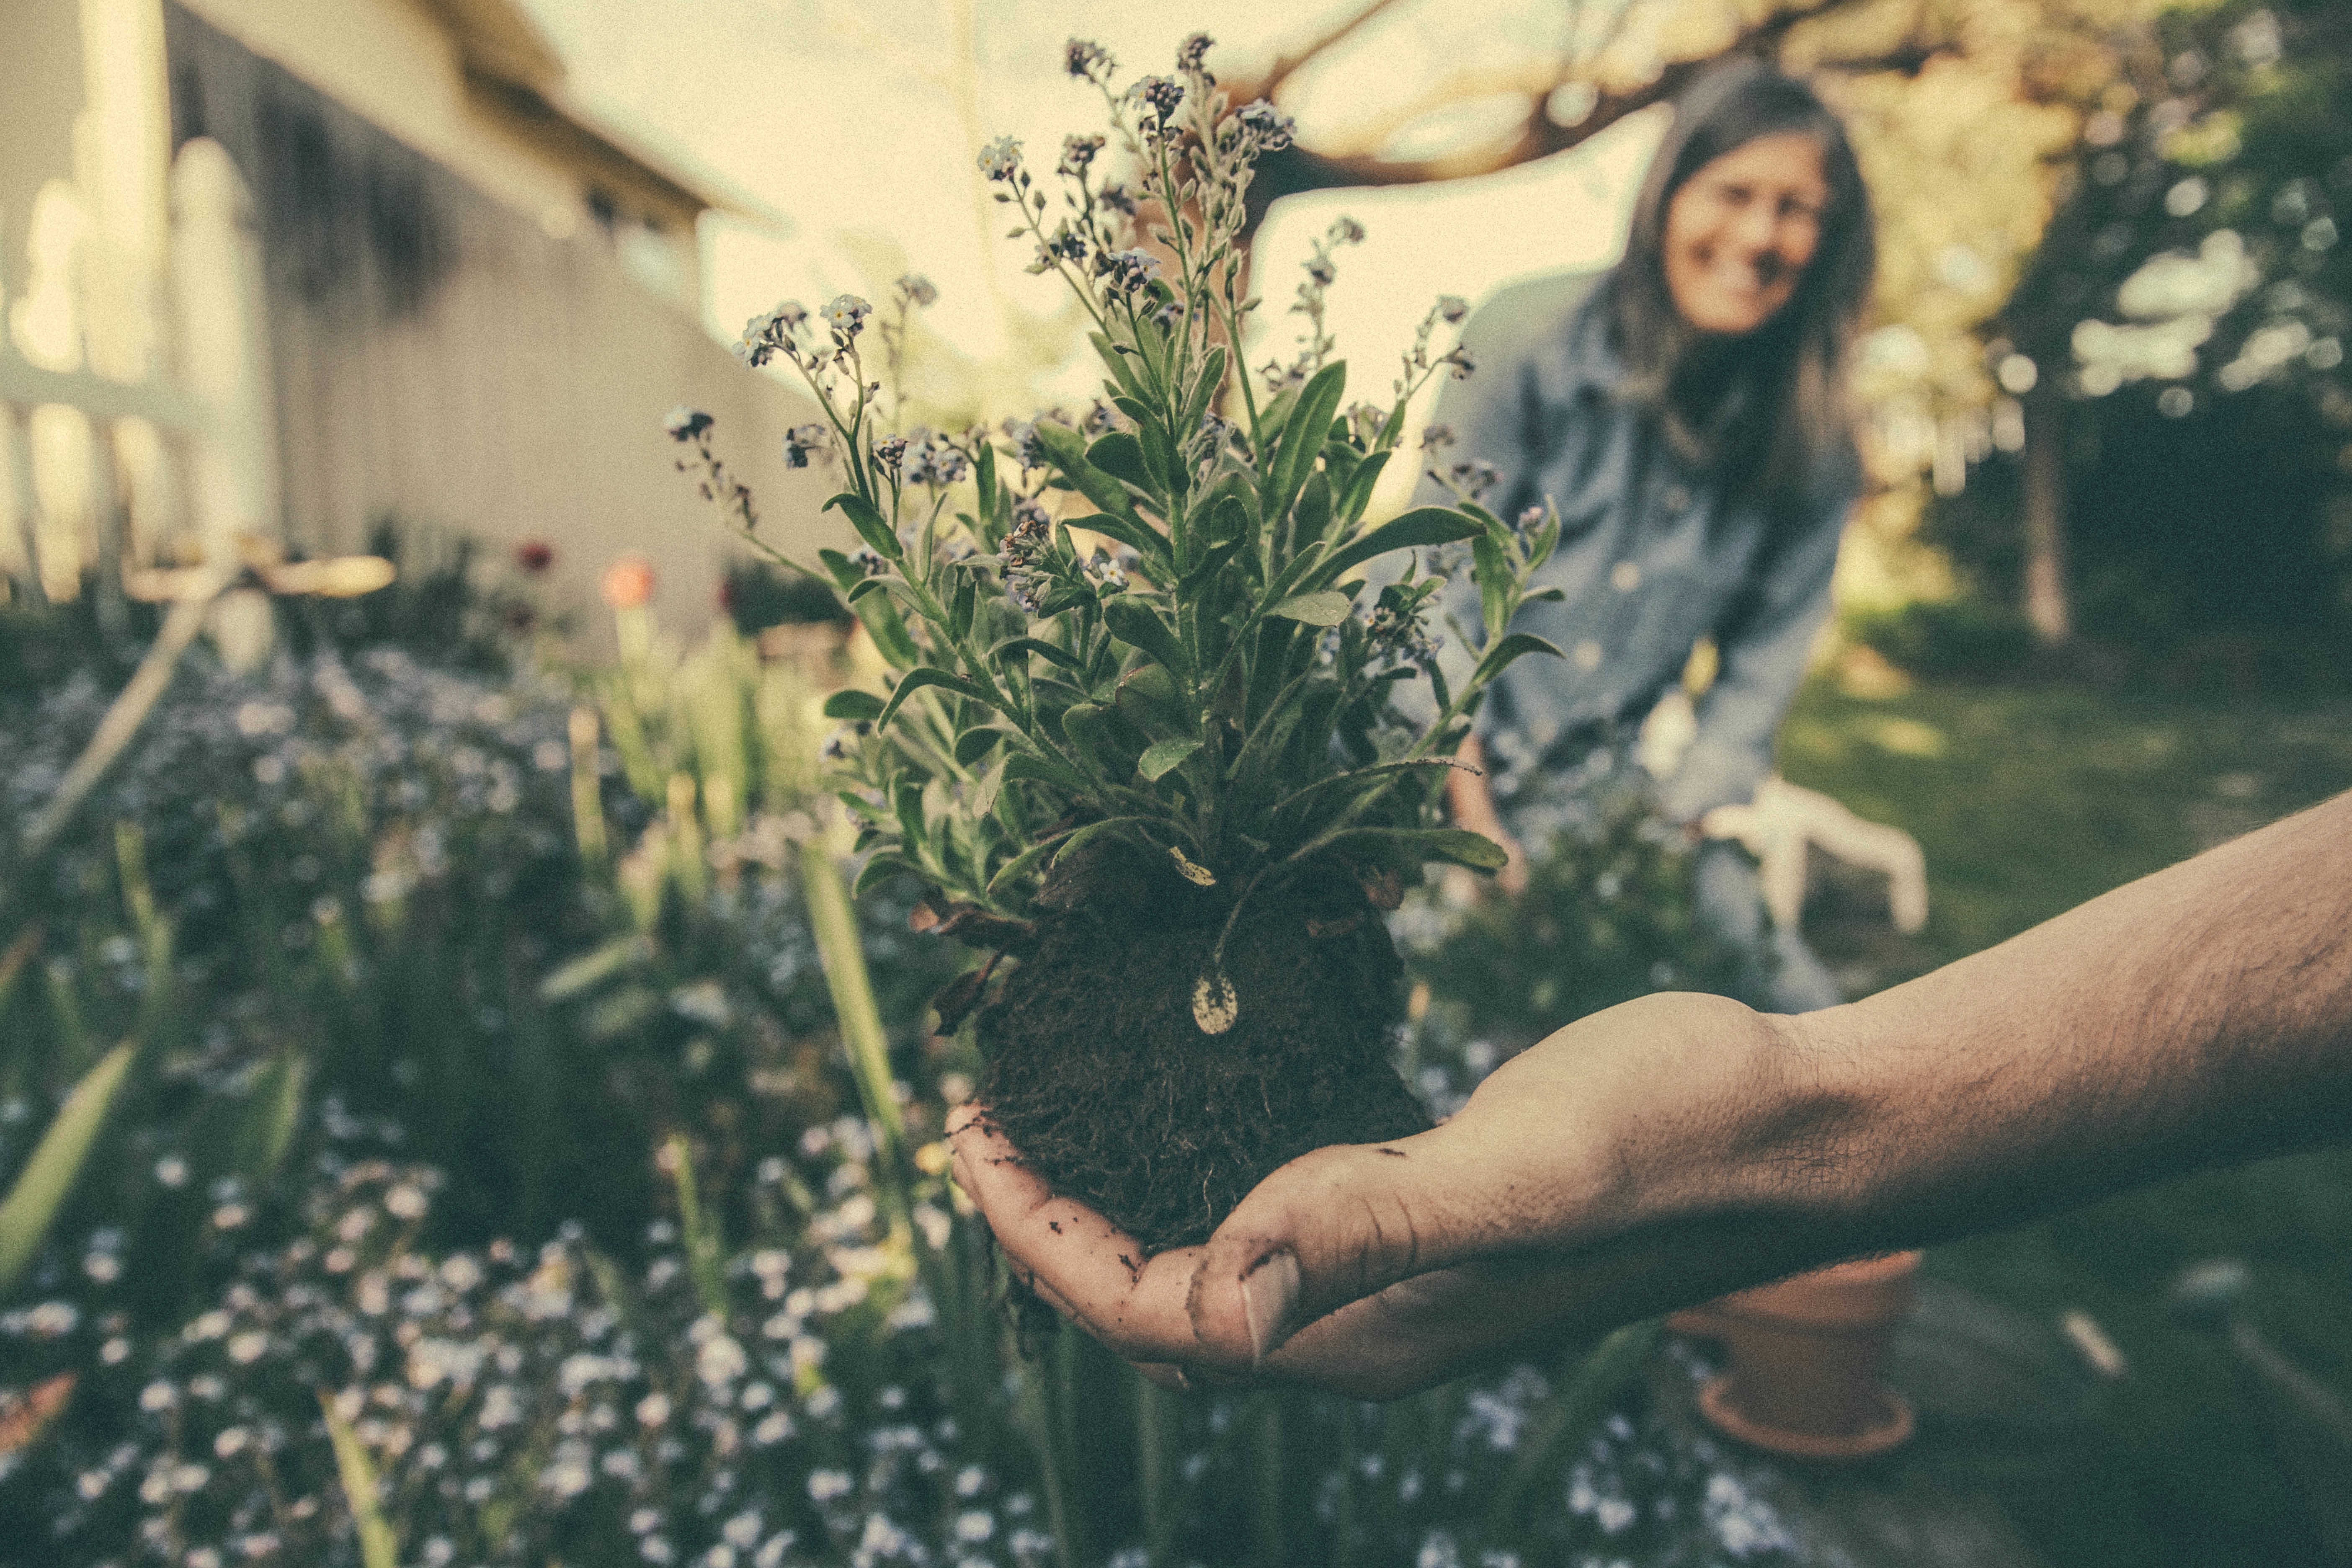 Gardening - 4 easy stretches to prevent back pain